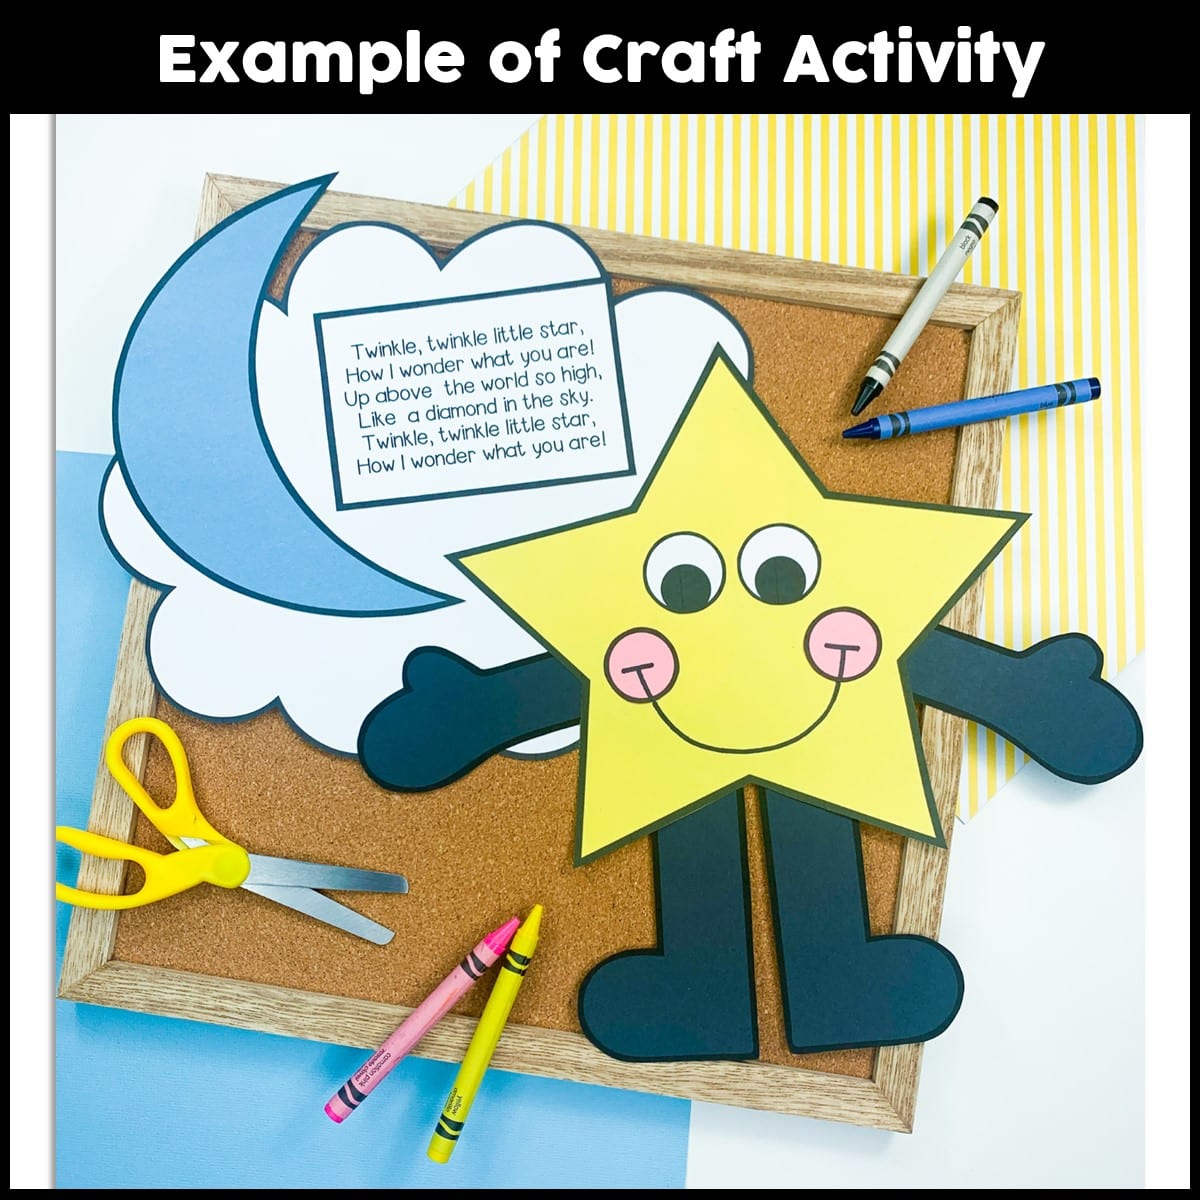 Twinkle Twinkle Little Star Craft Activity - Crafty Bee Creations